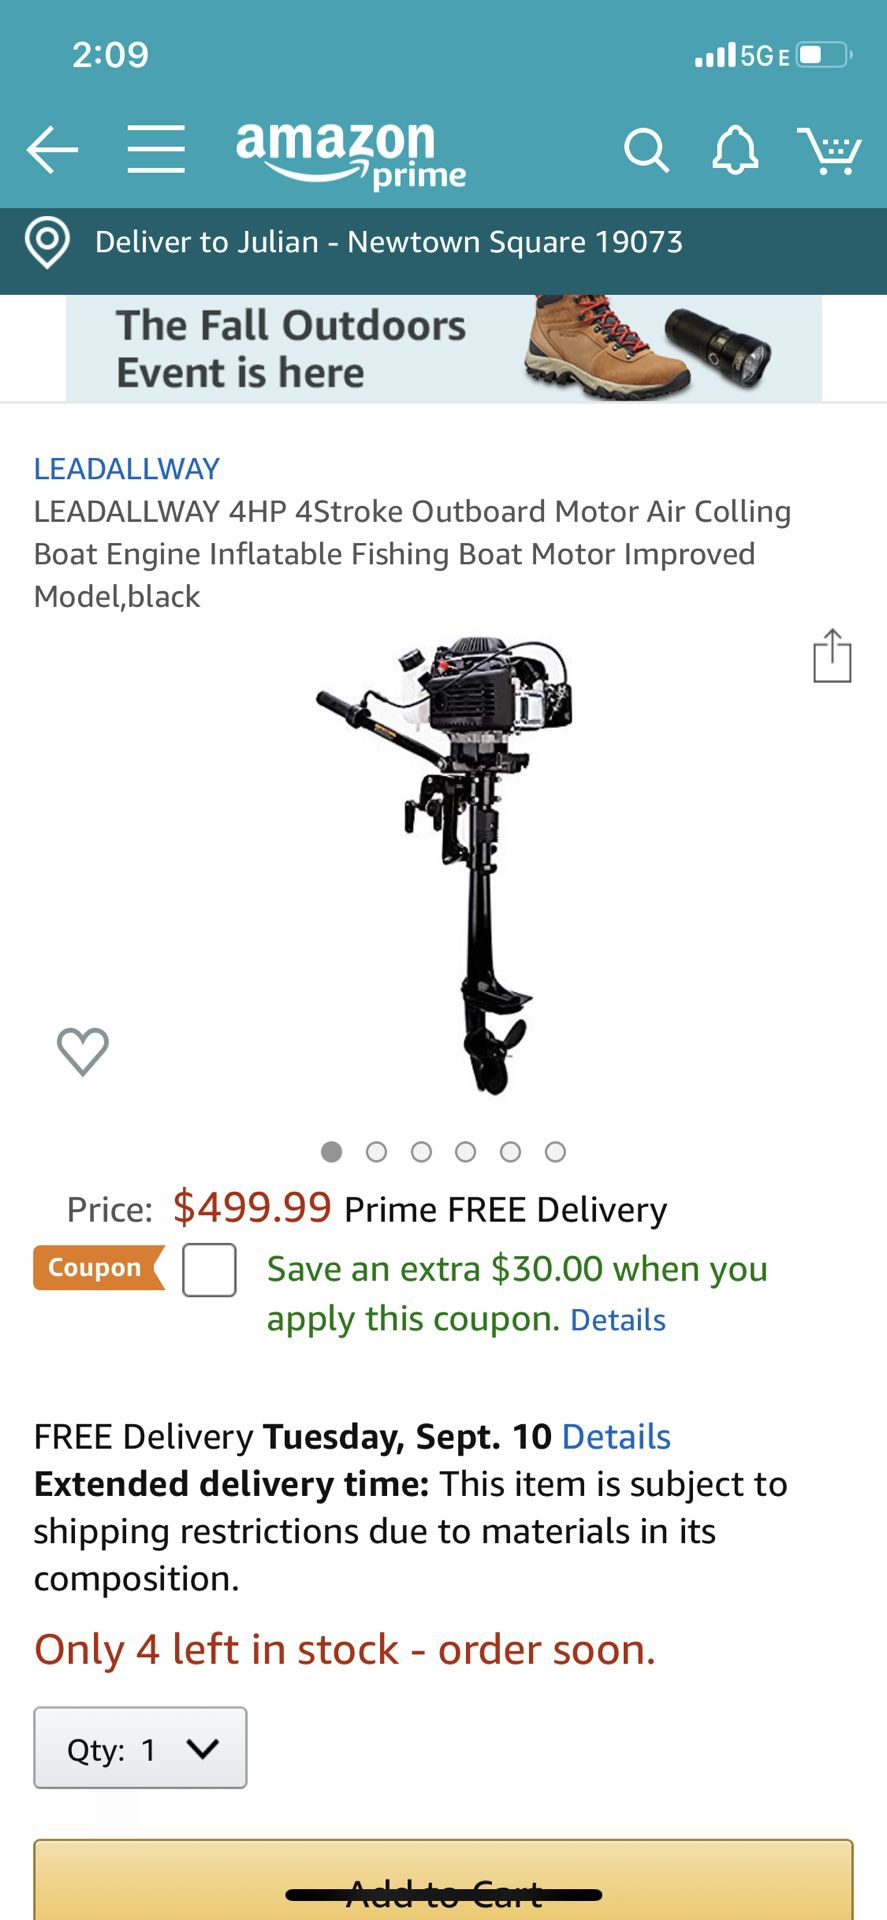 Lead all the way outboard motor 4hp x 4 stroke